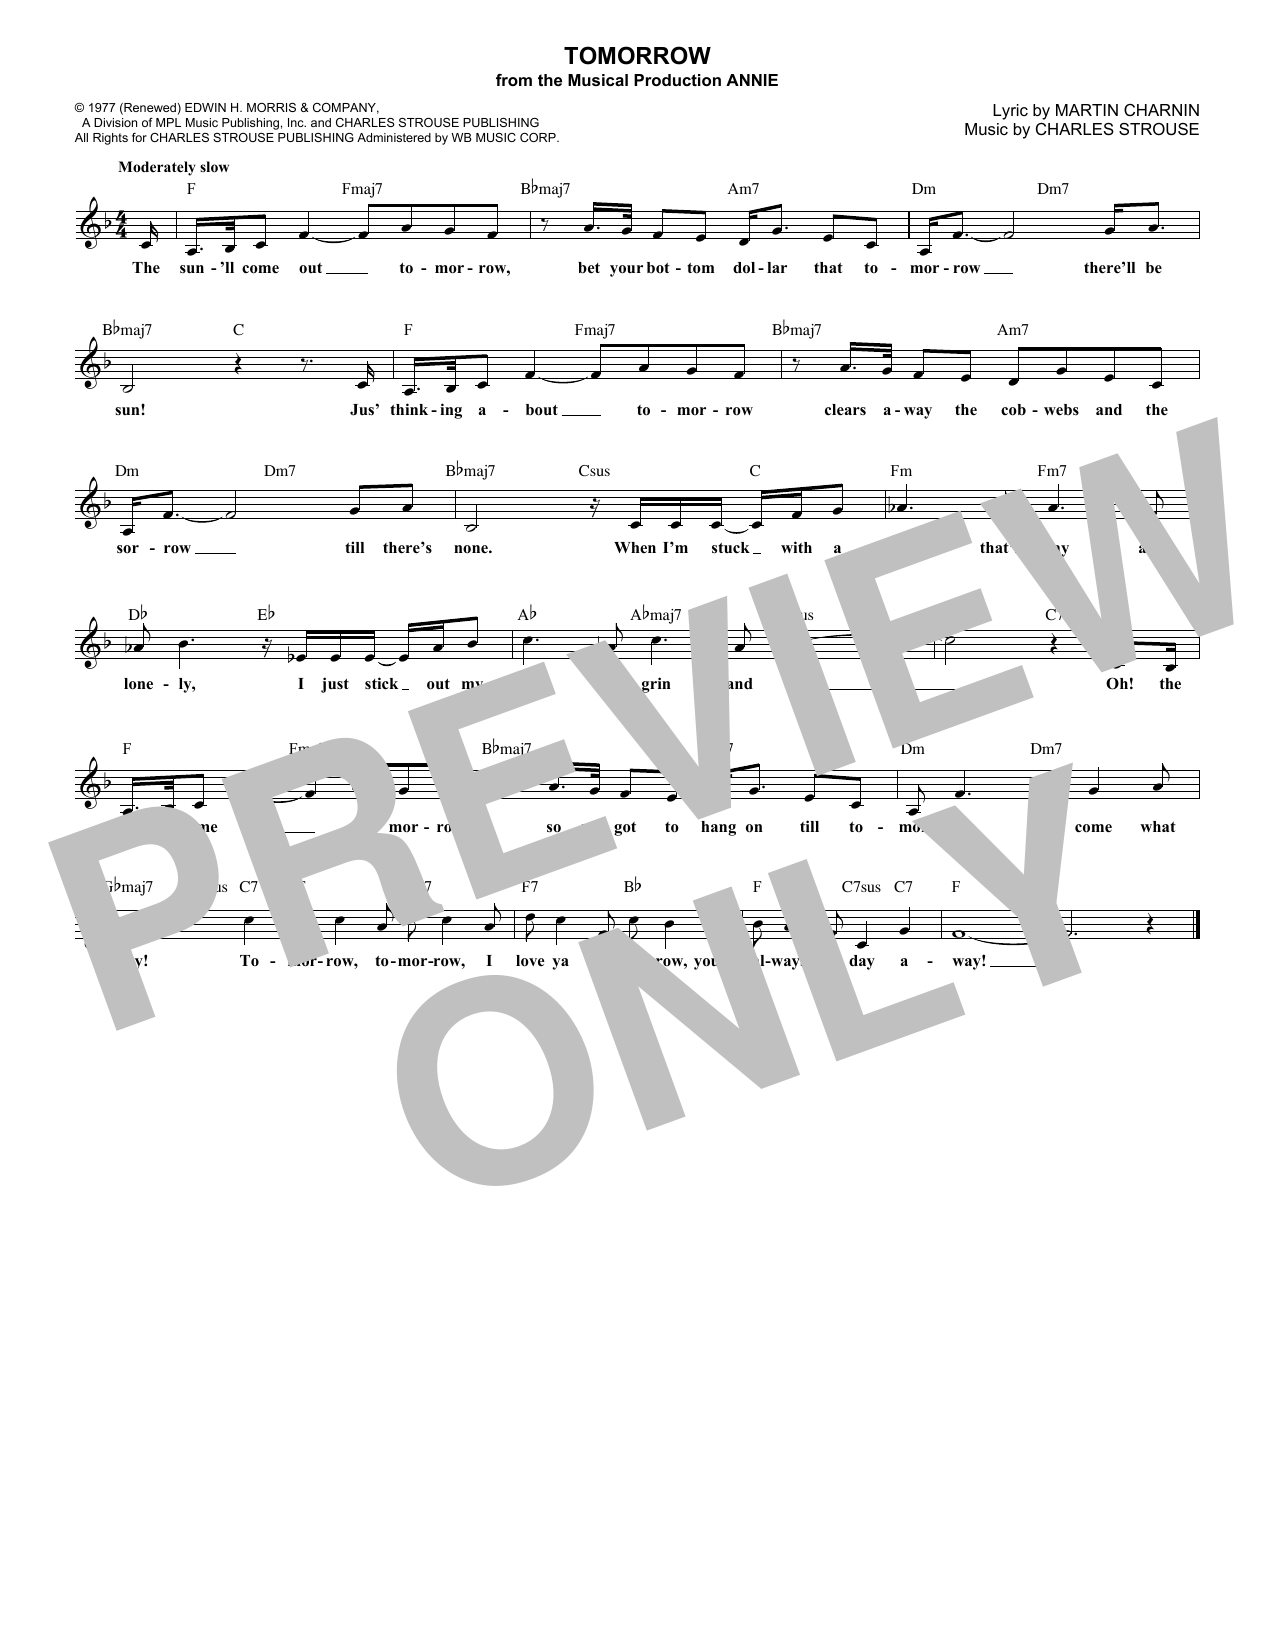 Download Charles Strouse Tomorrow Sheet Music